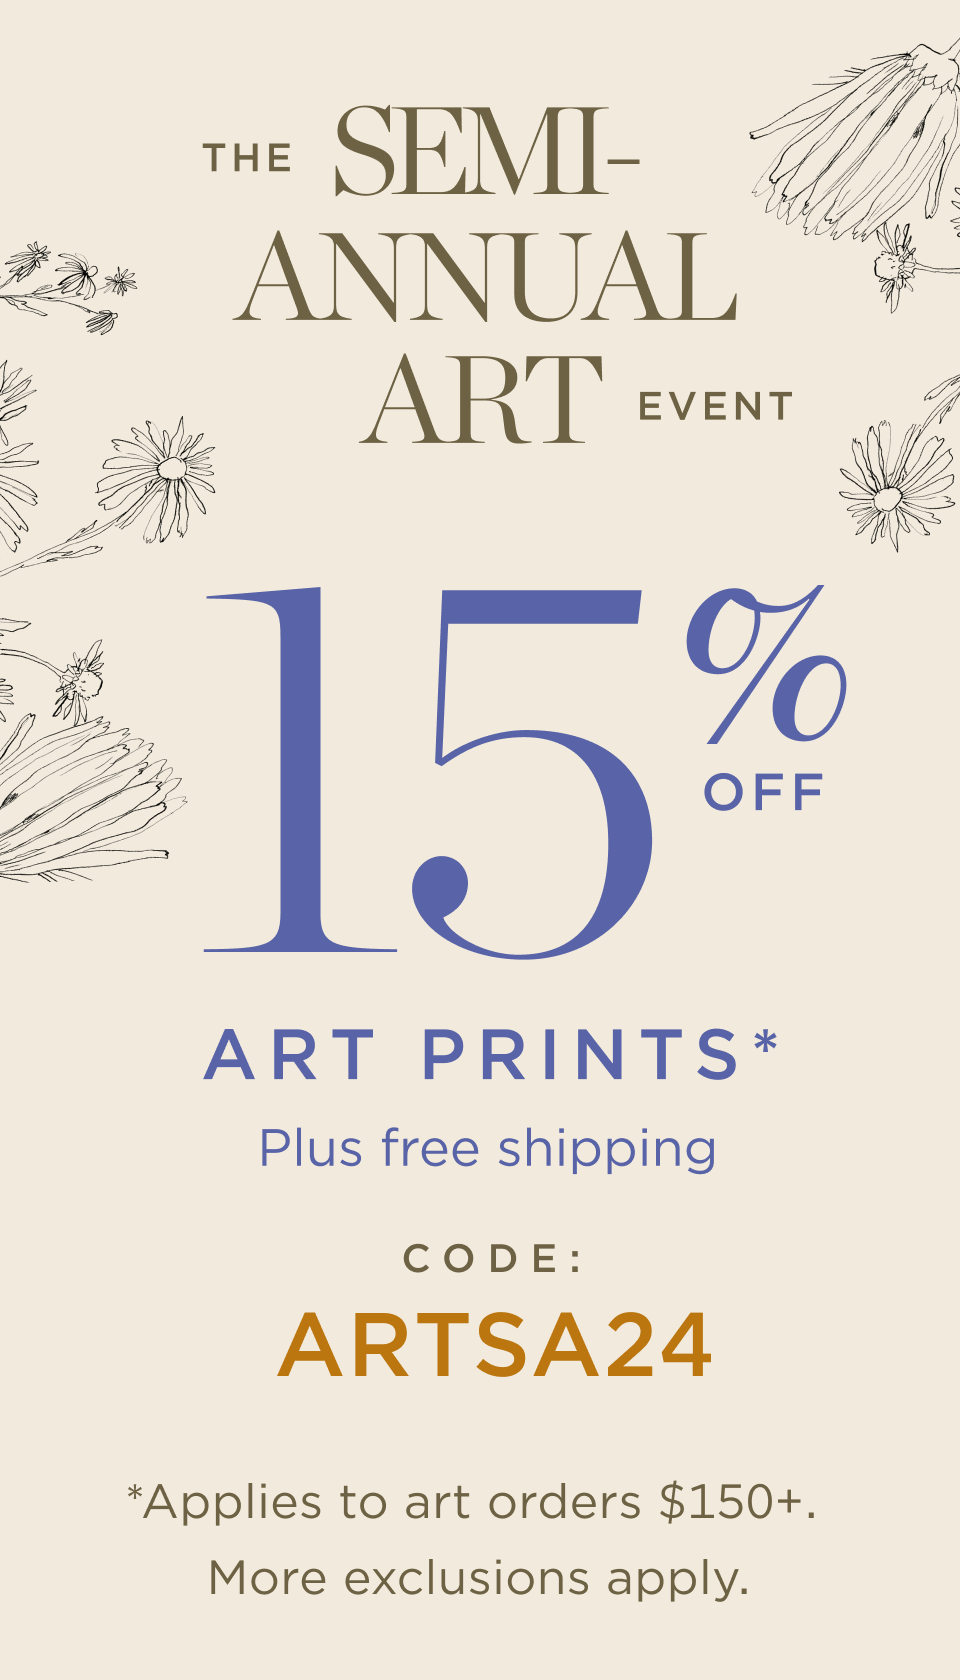 15% off + FREE shipping on art prints*